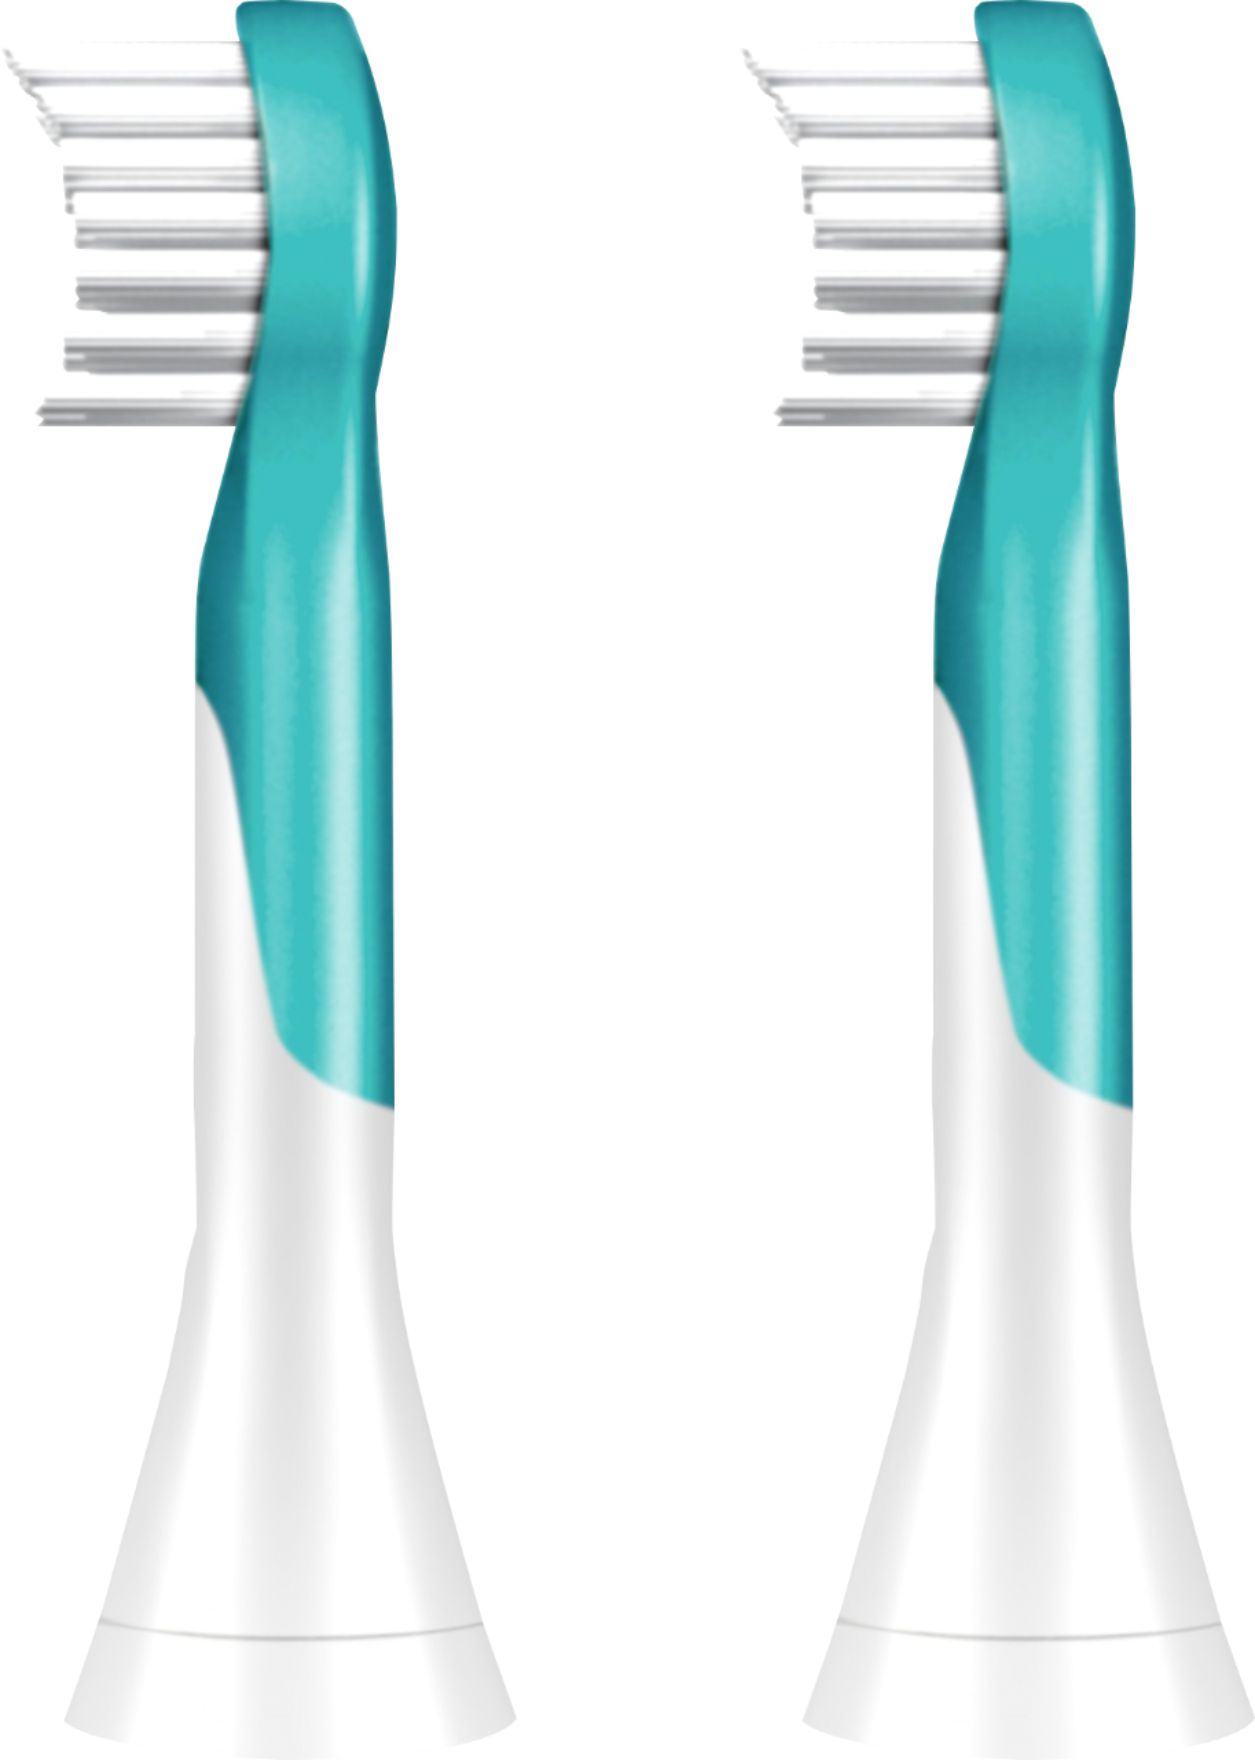 sonicare replacement heads c3